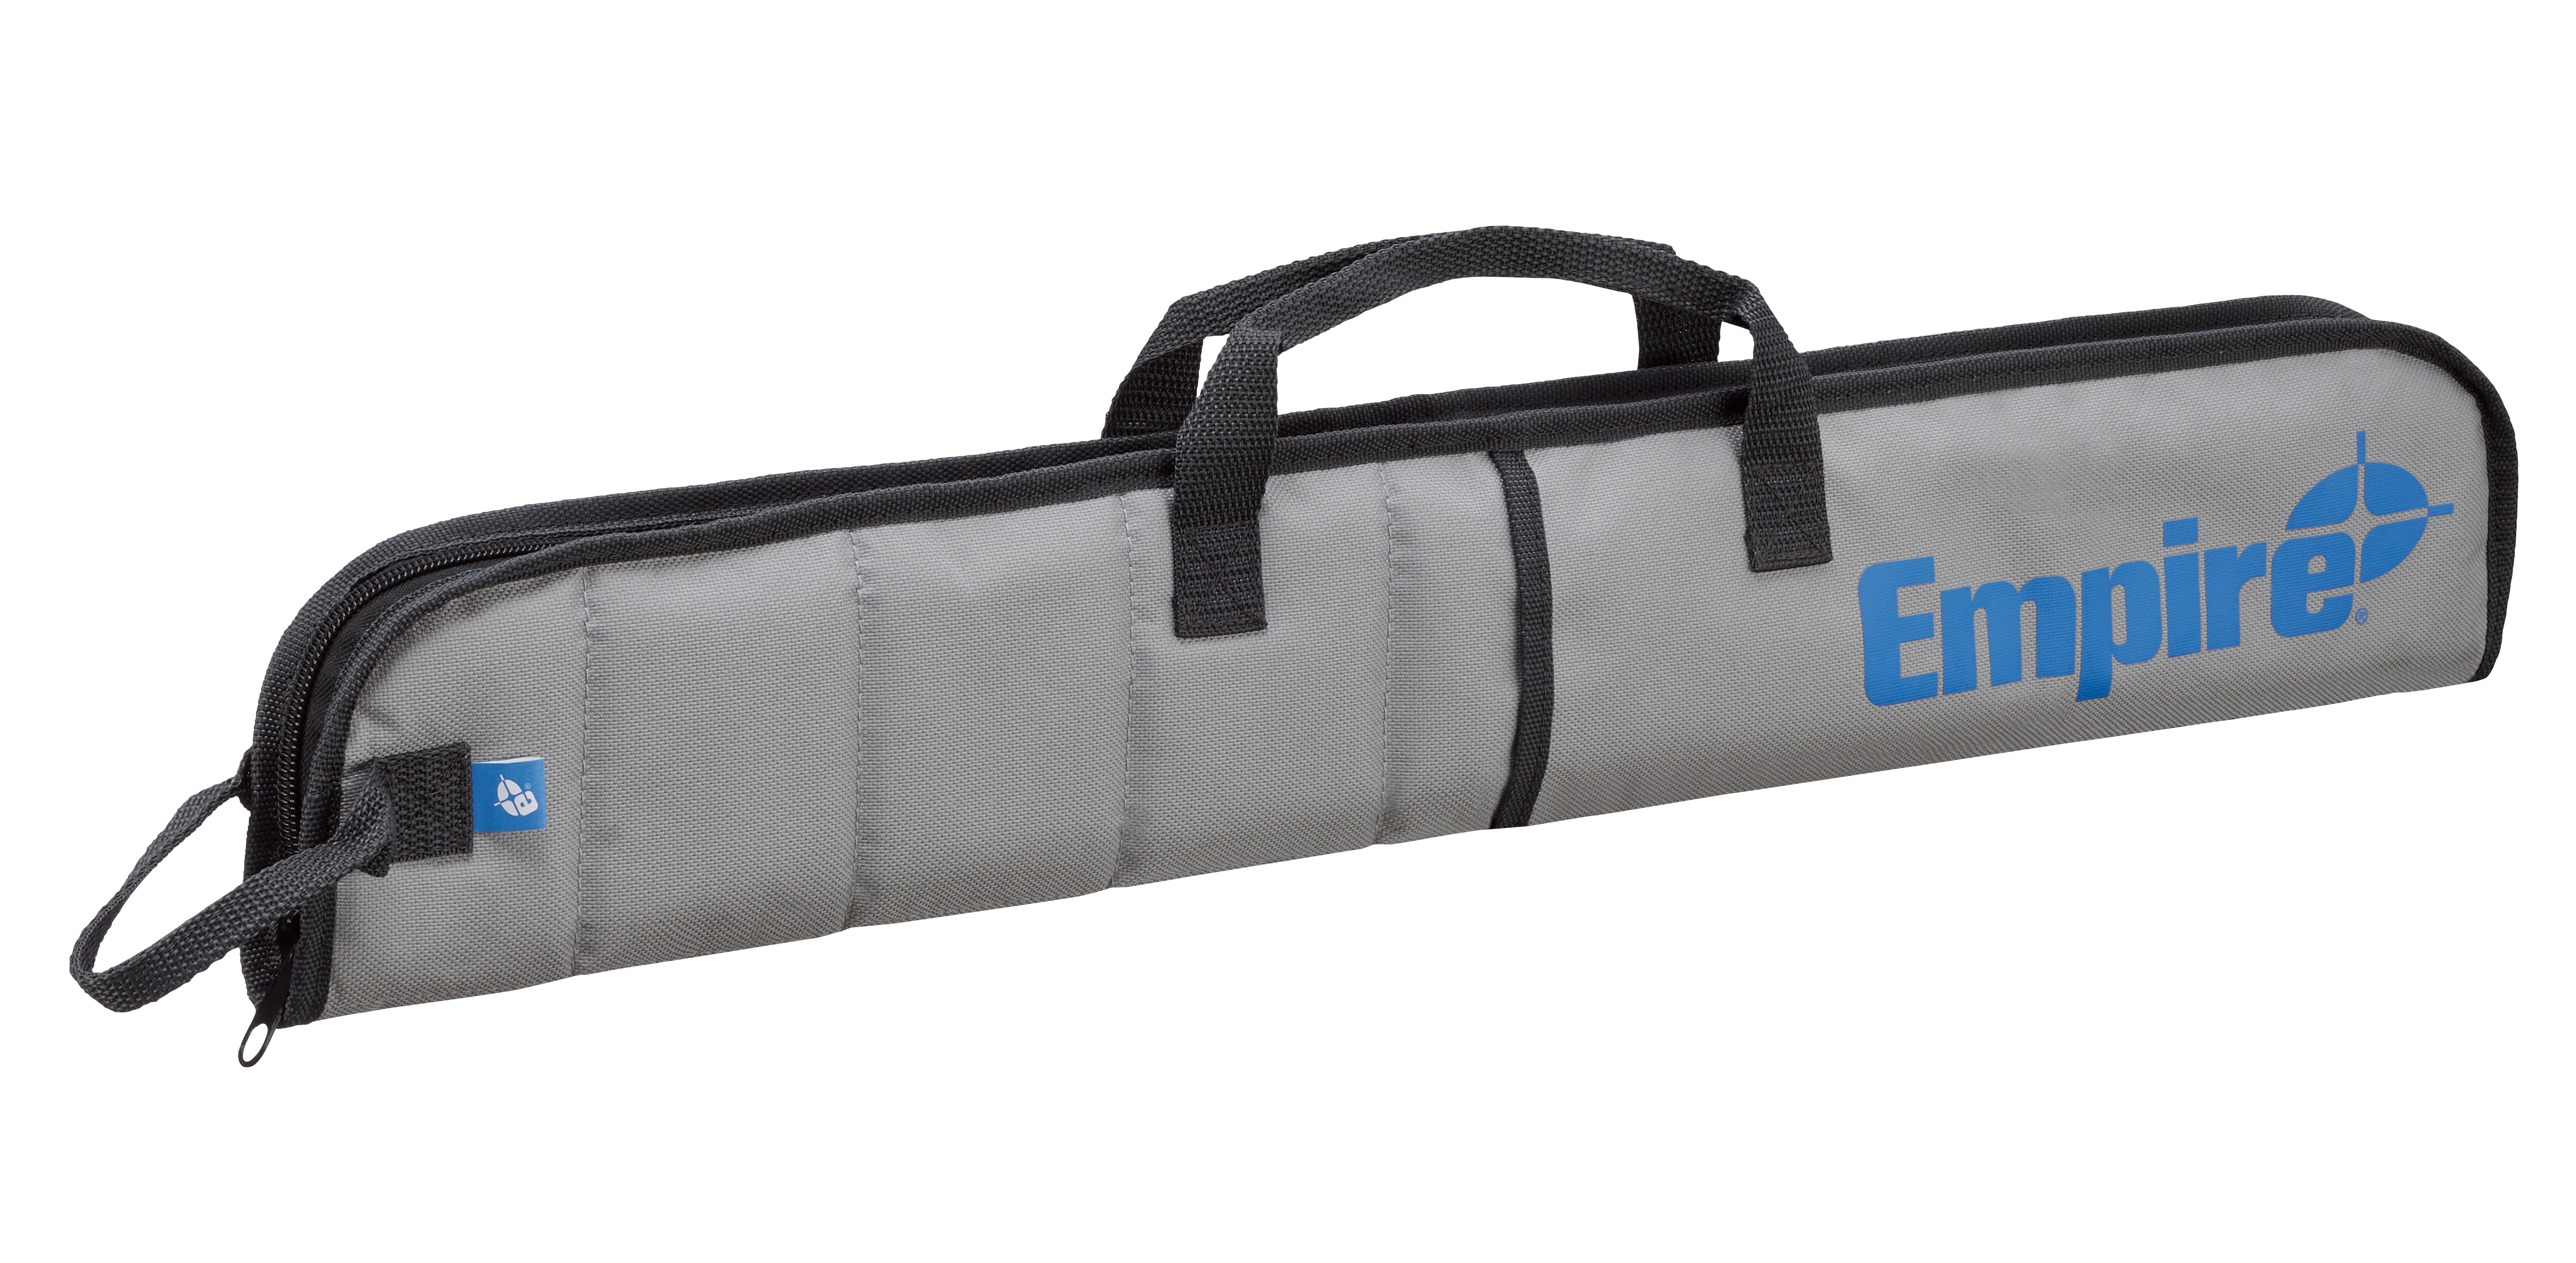 The 24 in. level case is made of a nylon material that has extra padding to protect your level. With an reinforced handle and top, hang handle for easy transport and storing. There are two additional pockets for torpedo levels and/or miscellaneous items.